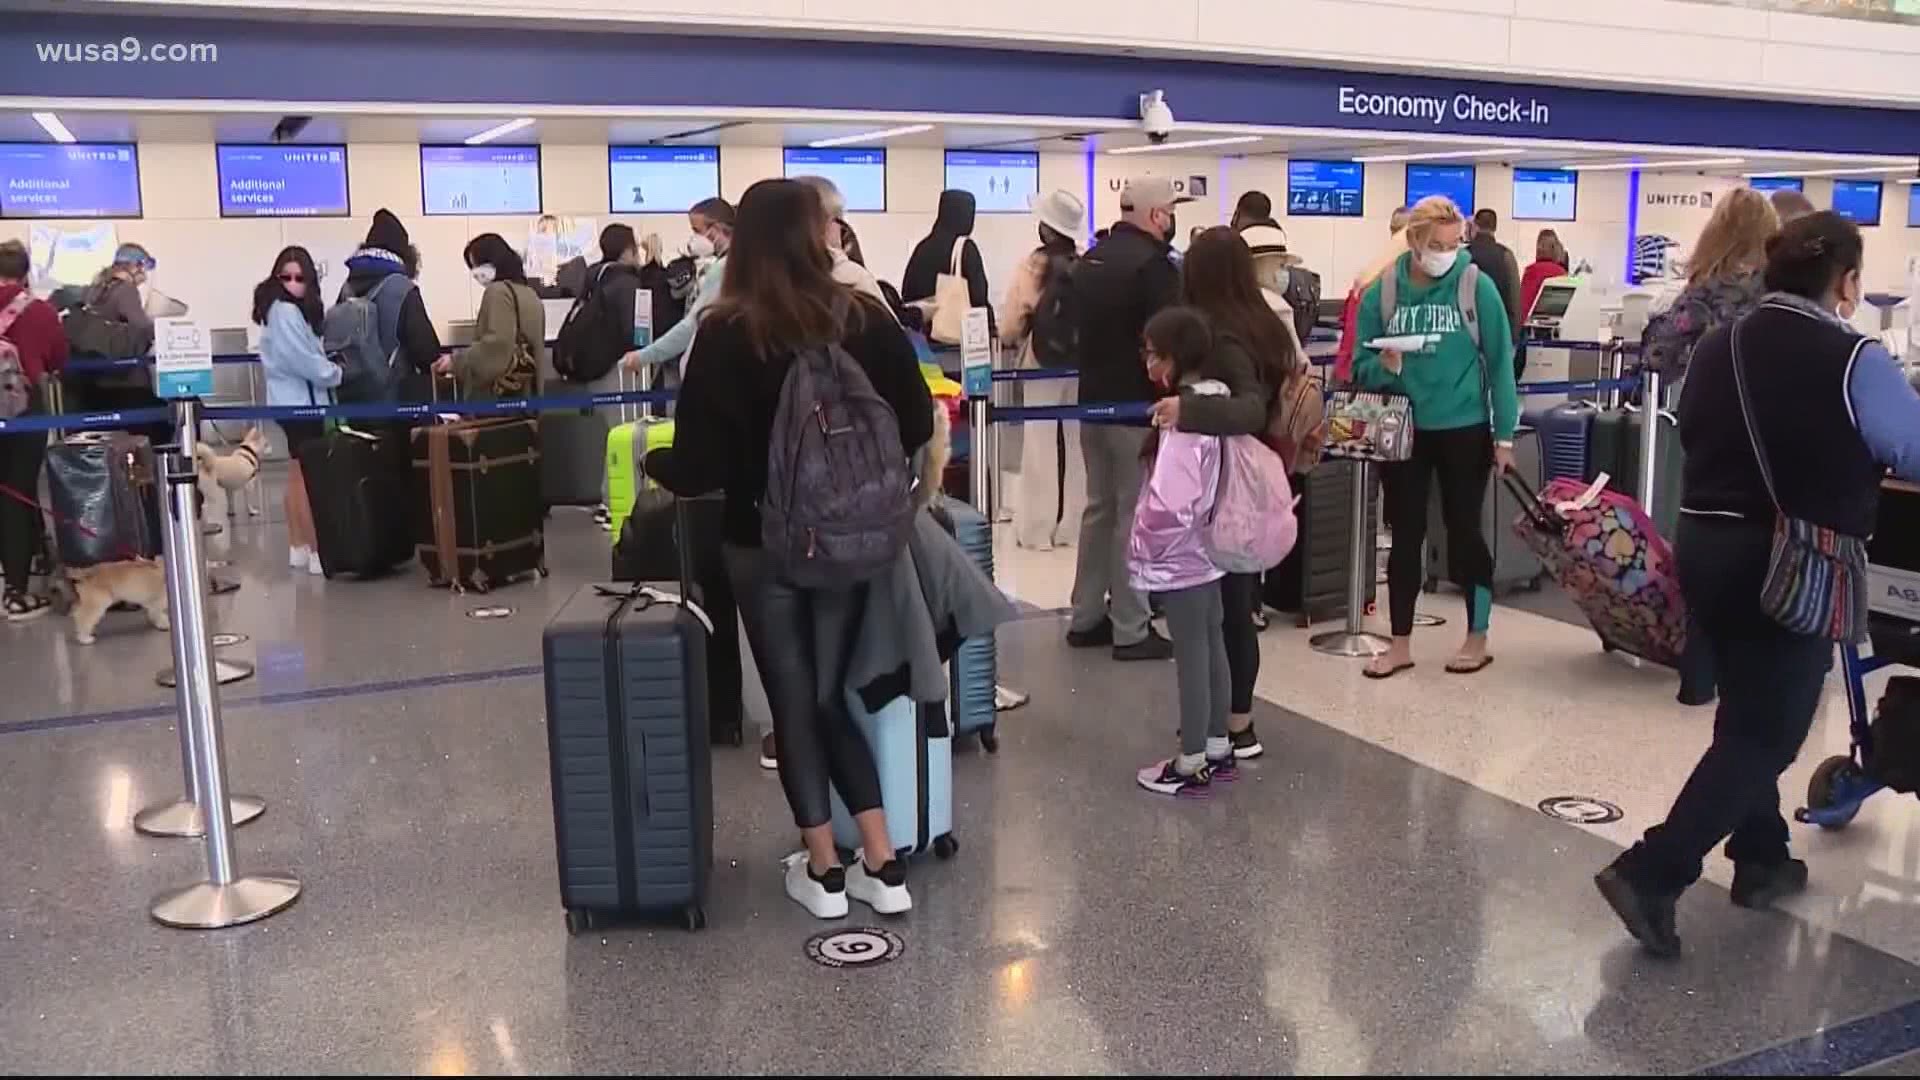 A business owner who has dozens of stores at DMV airports shares how her employees have been impacted by the coronavirus as people travel less this holiday season.